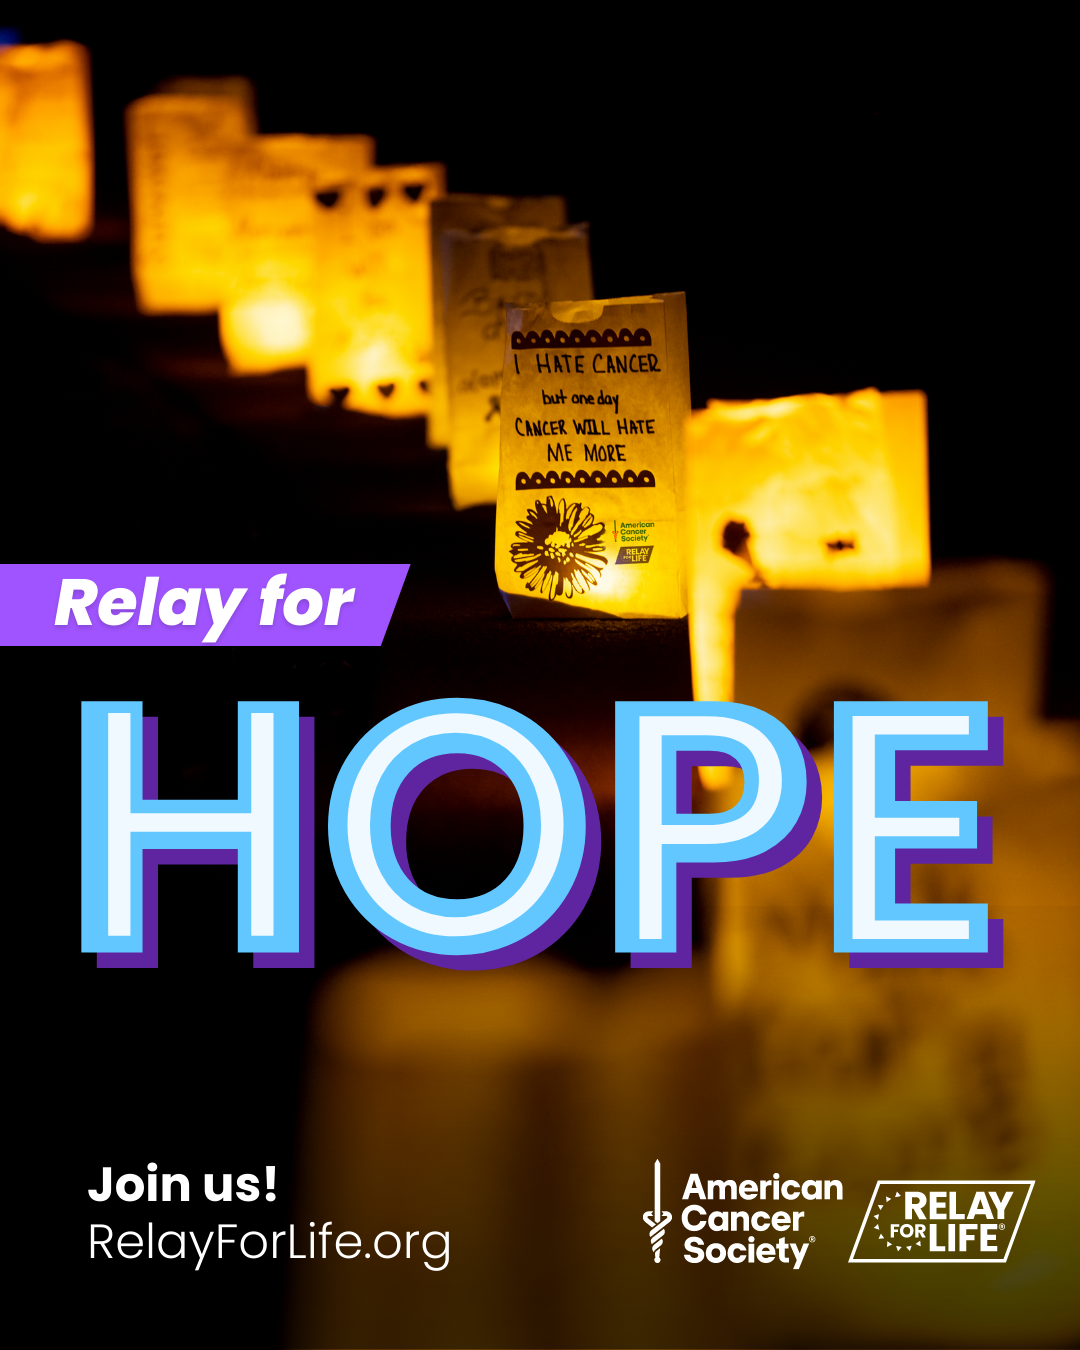 Give your support to a Relay team and you’ll provide
hope to people with cancer and their caregivers. Sign
up at RelayForLife.org/EVENTNAME to fight back
together! #RelayForLifeEVENTNAME